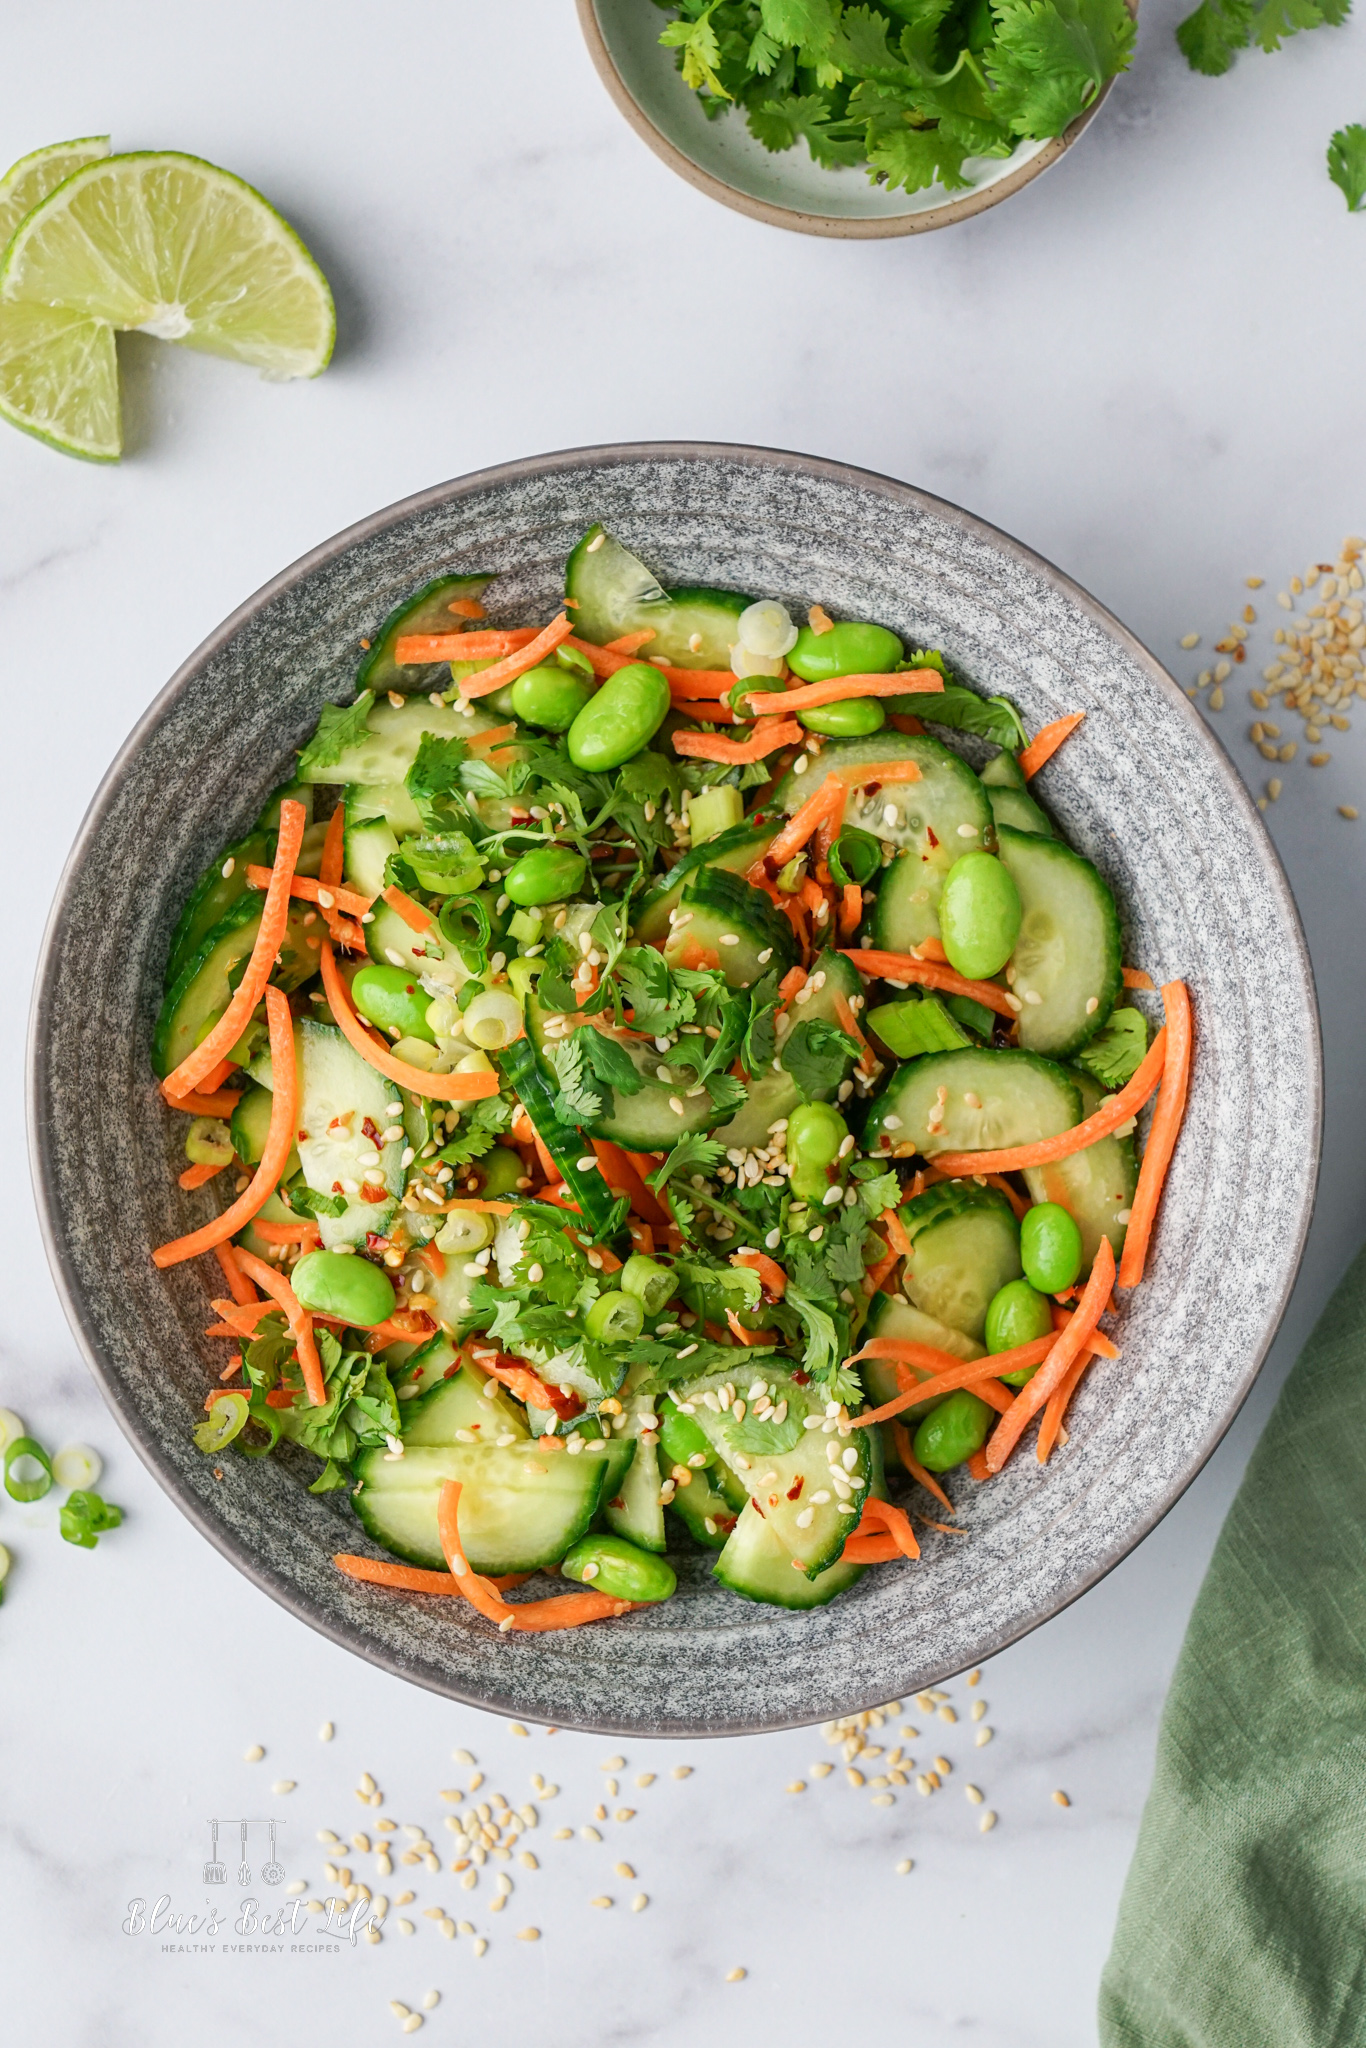 A bowl with cucumber carrot salad.